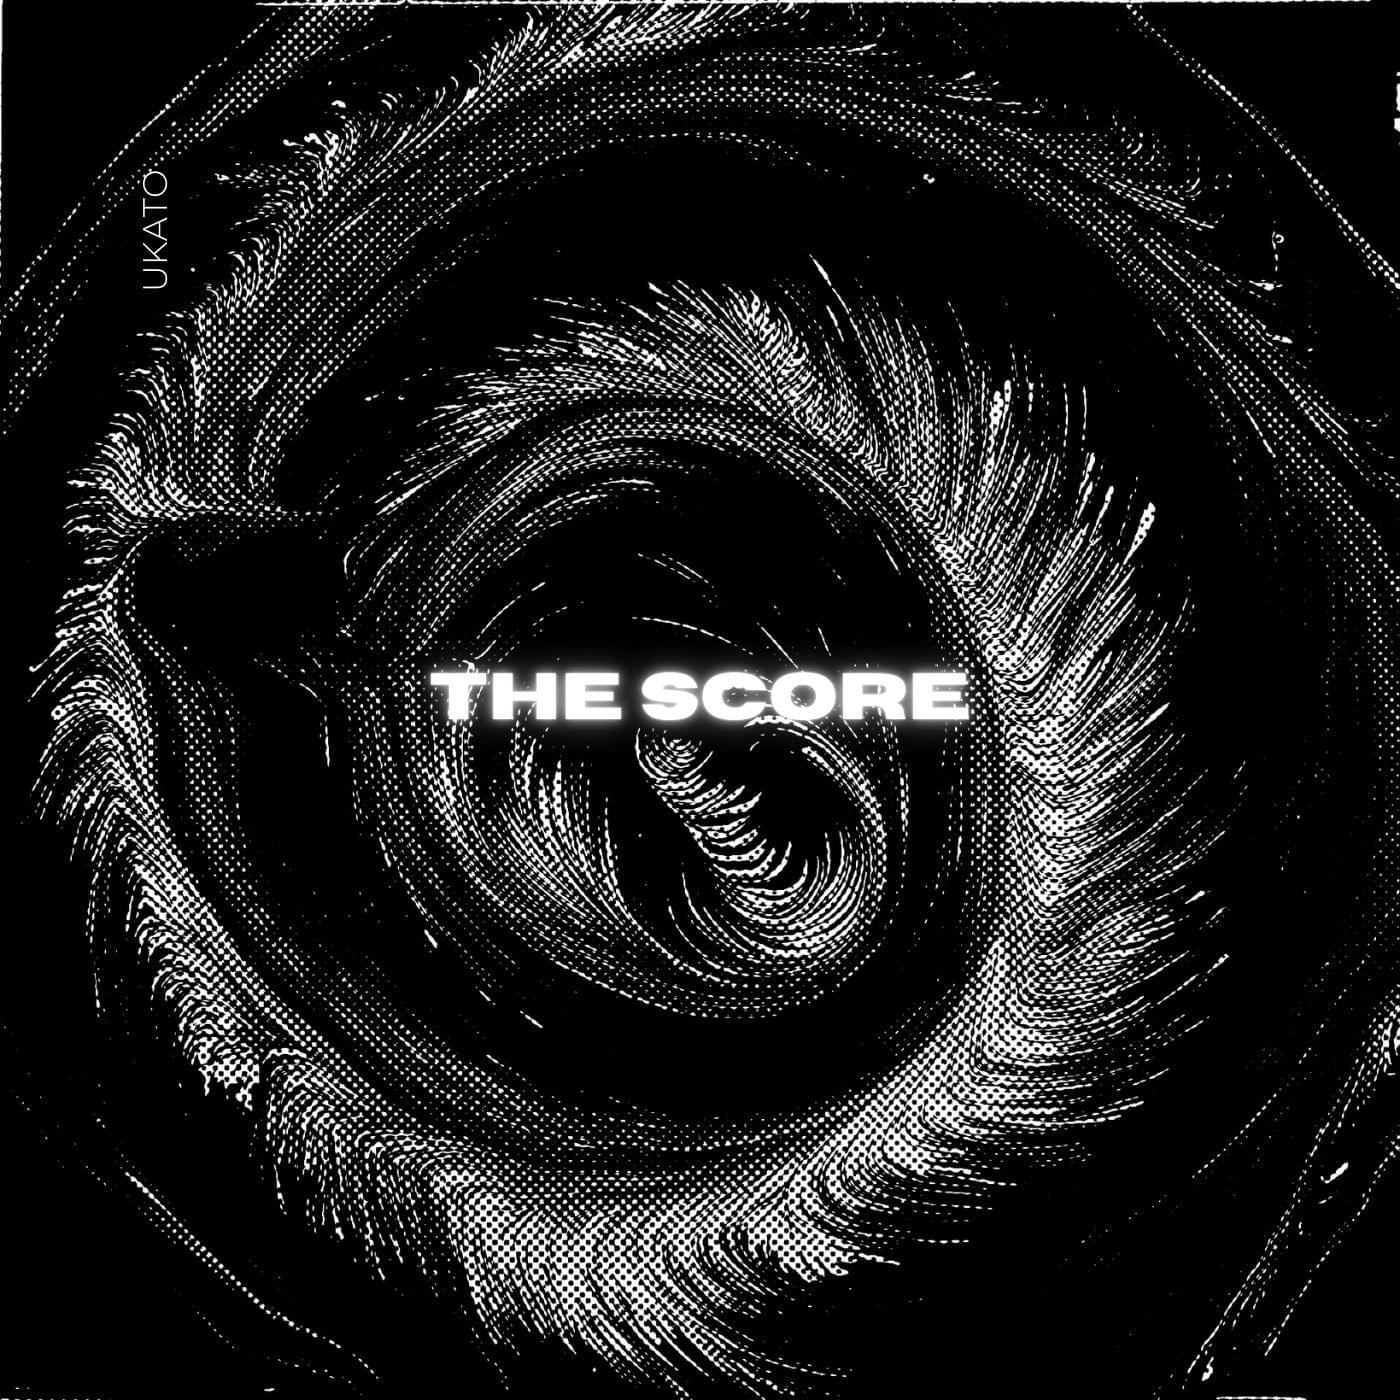 Cover art for The Score by UKato